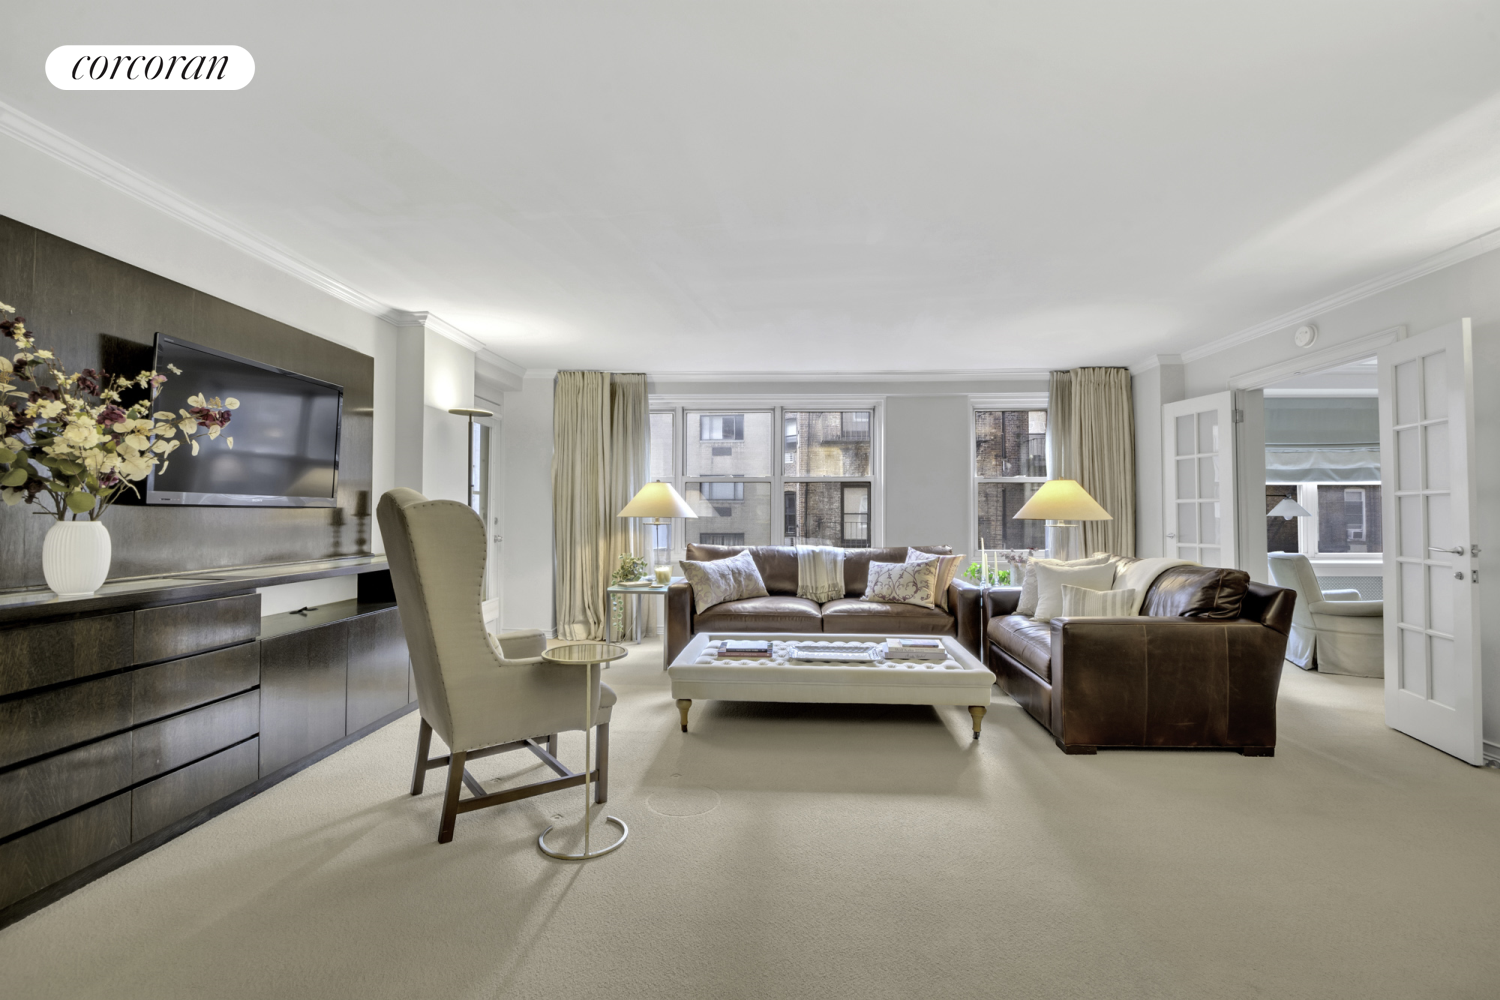 444 East 84th Street 3Gh, Yorkville, Upper East Side, NYC - 2 Bedrooms  
2 Bathrooms  
5 Rooms - 